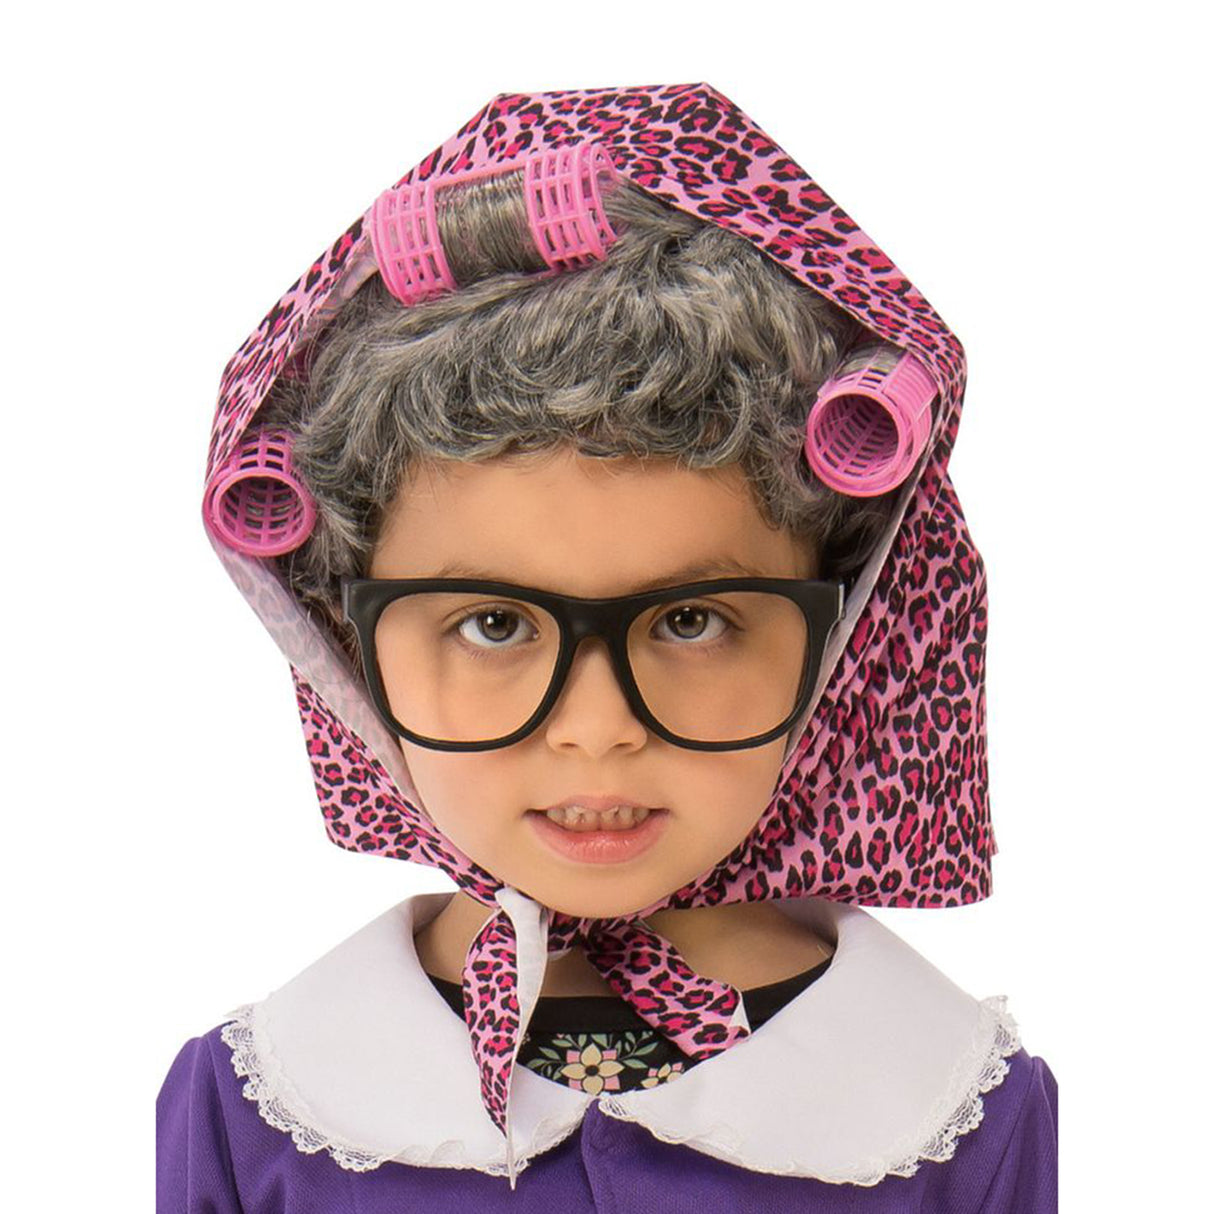 Rubies Little Old Lady Costume (Toddler)